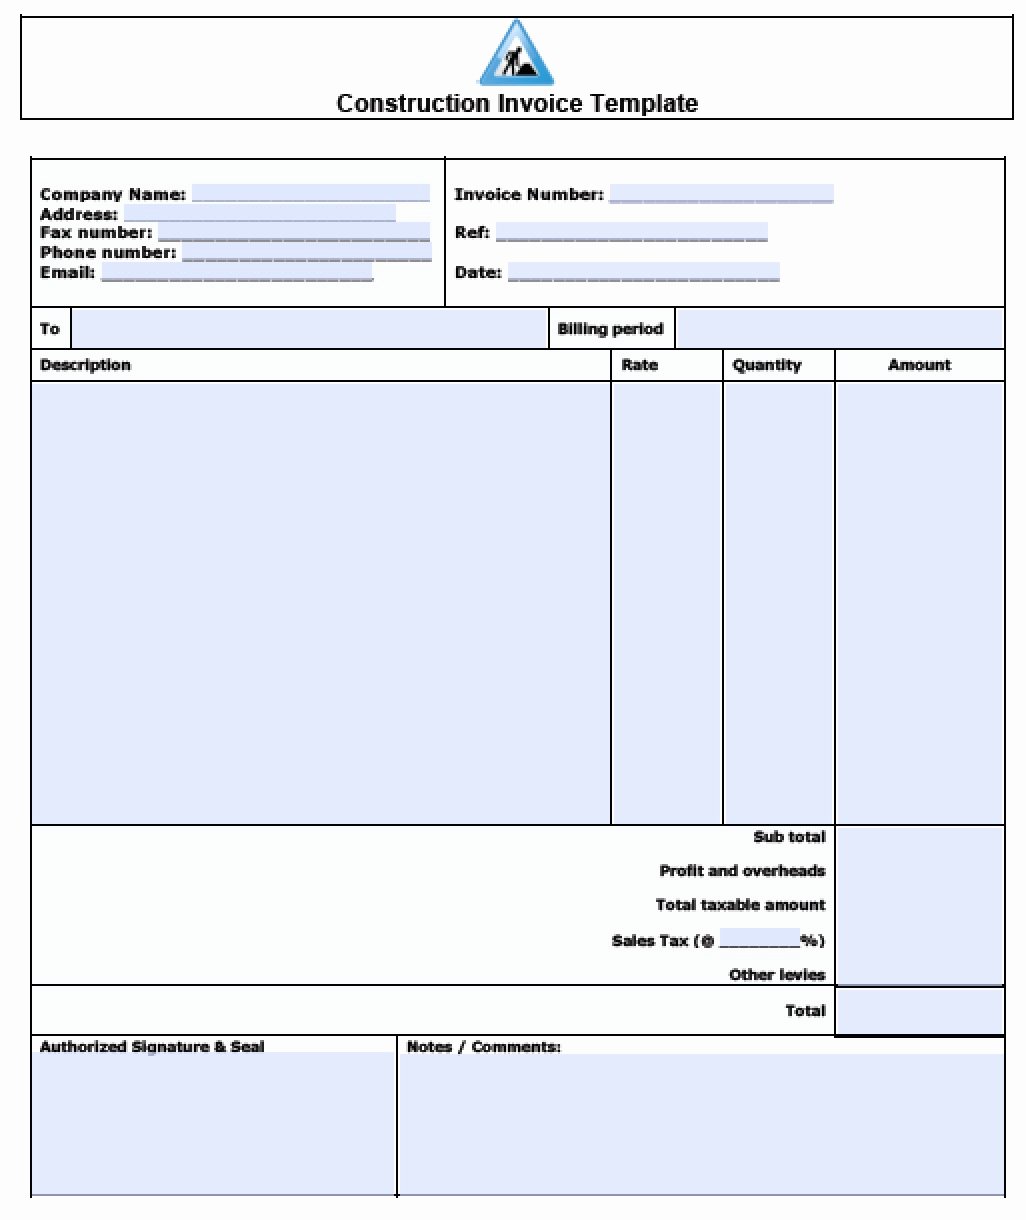 Free Contractor Invoice Template New Construction Invoice Template Excel